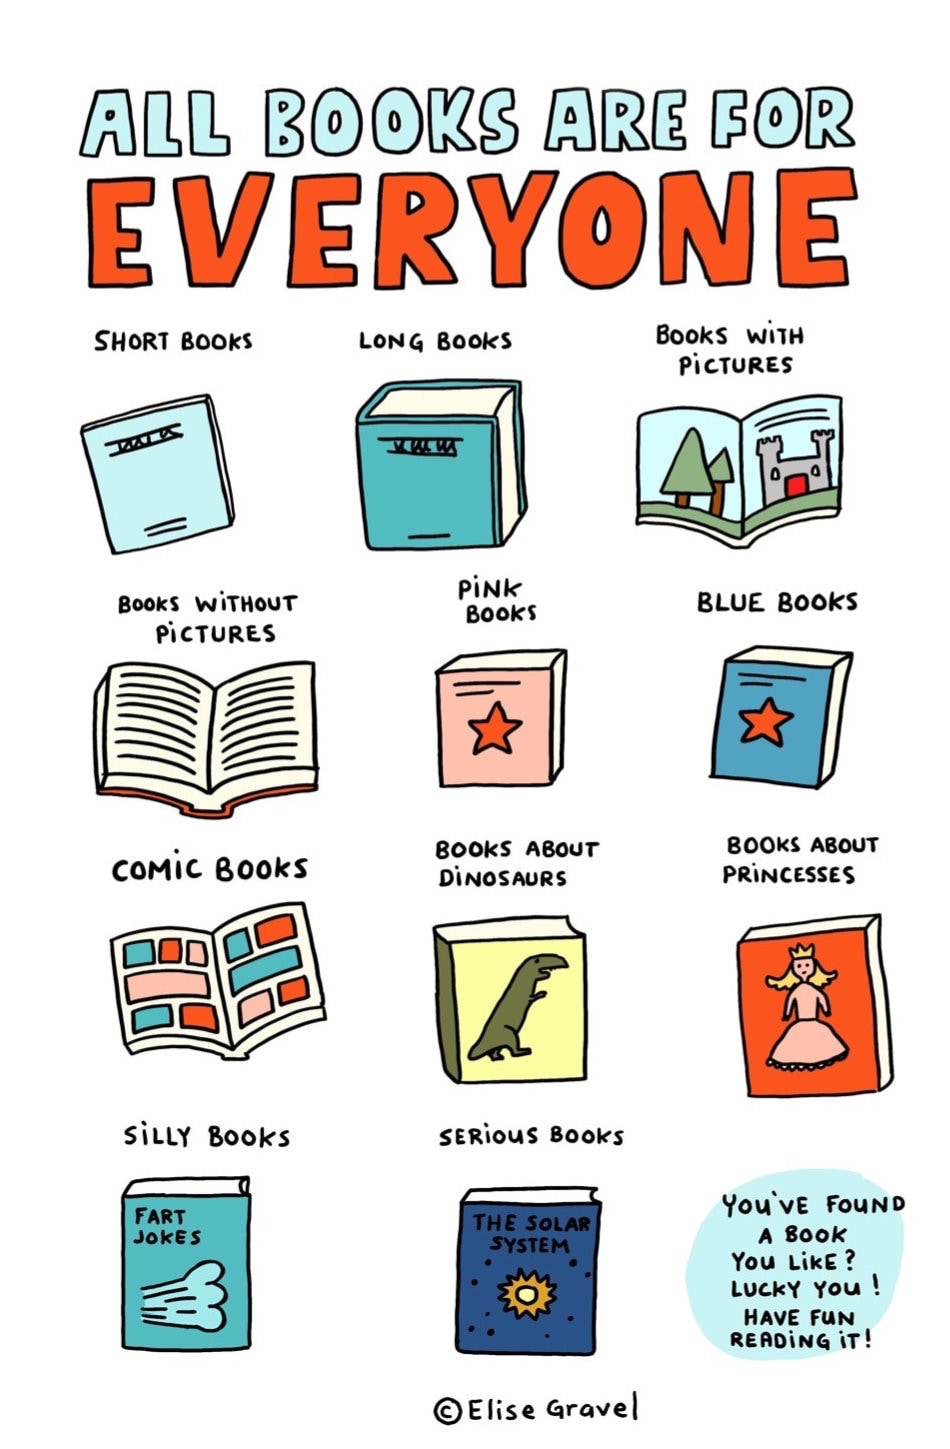 All books are for everyone!